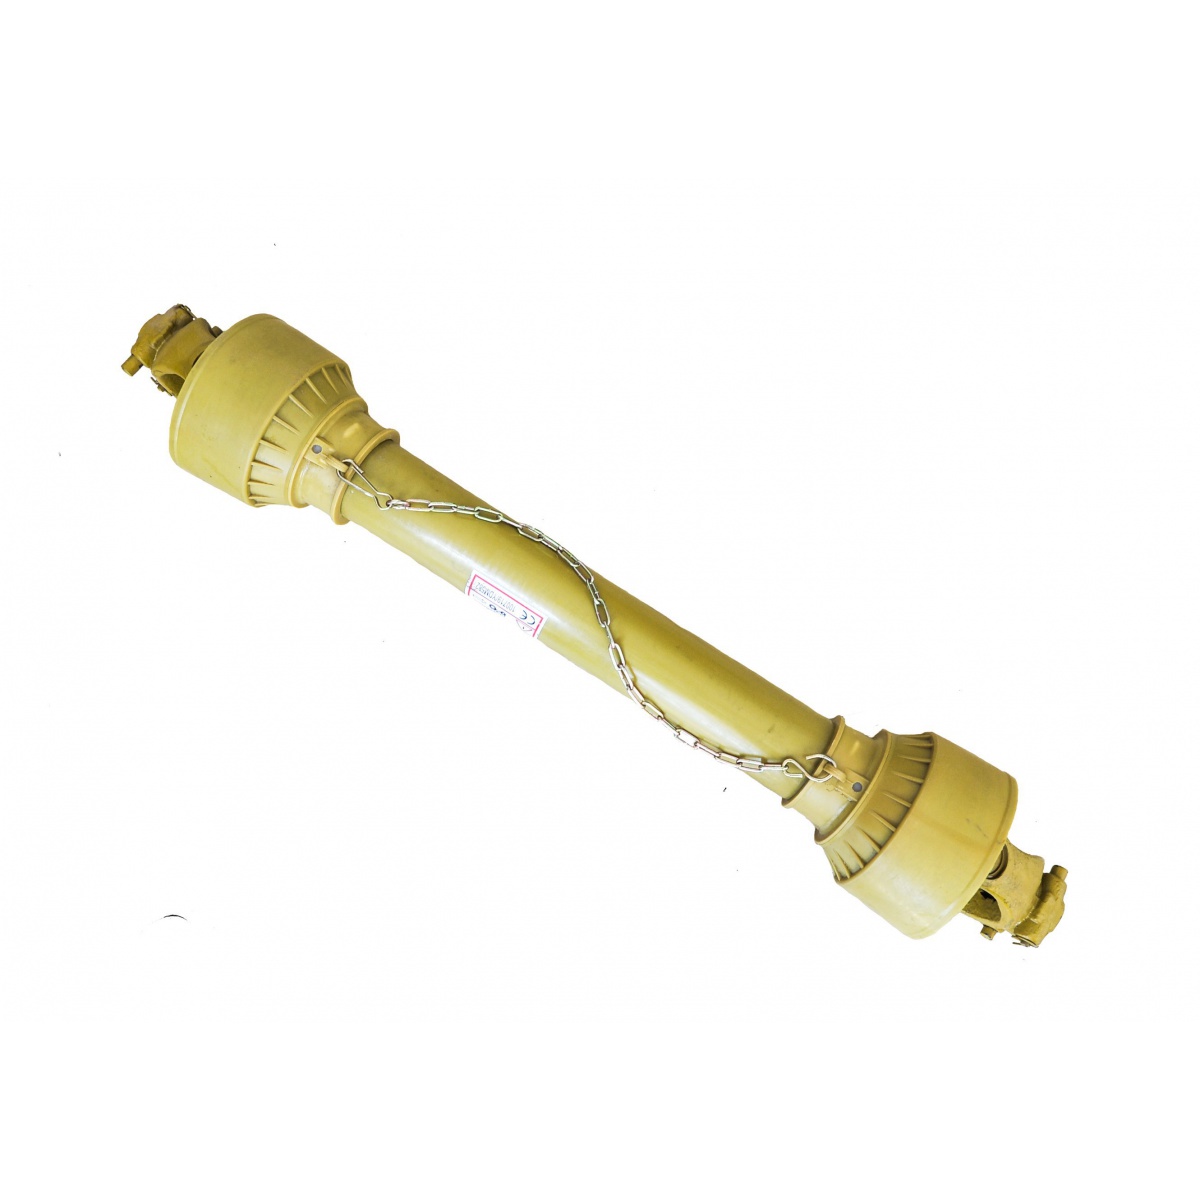 PTO shaft 07B - 150 cm / up to 105 HP